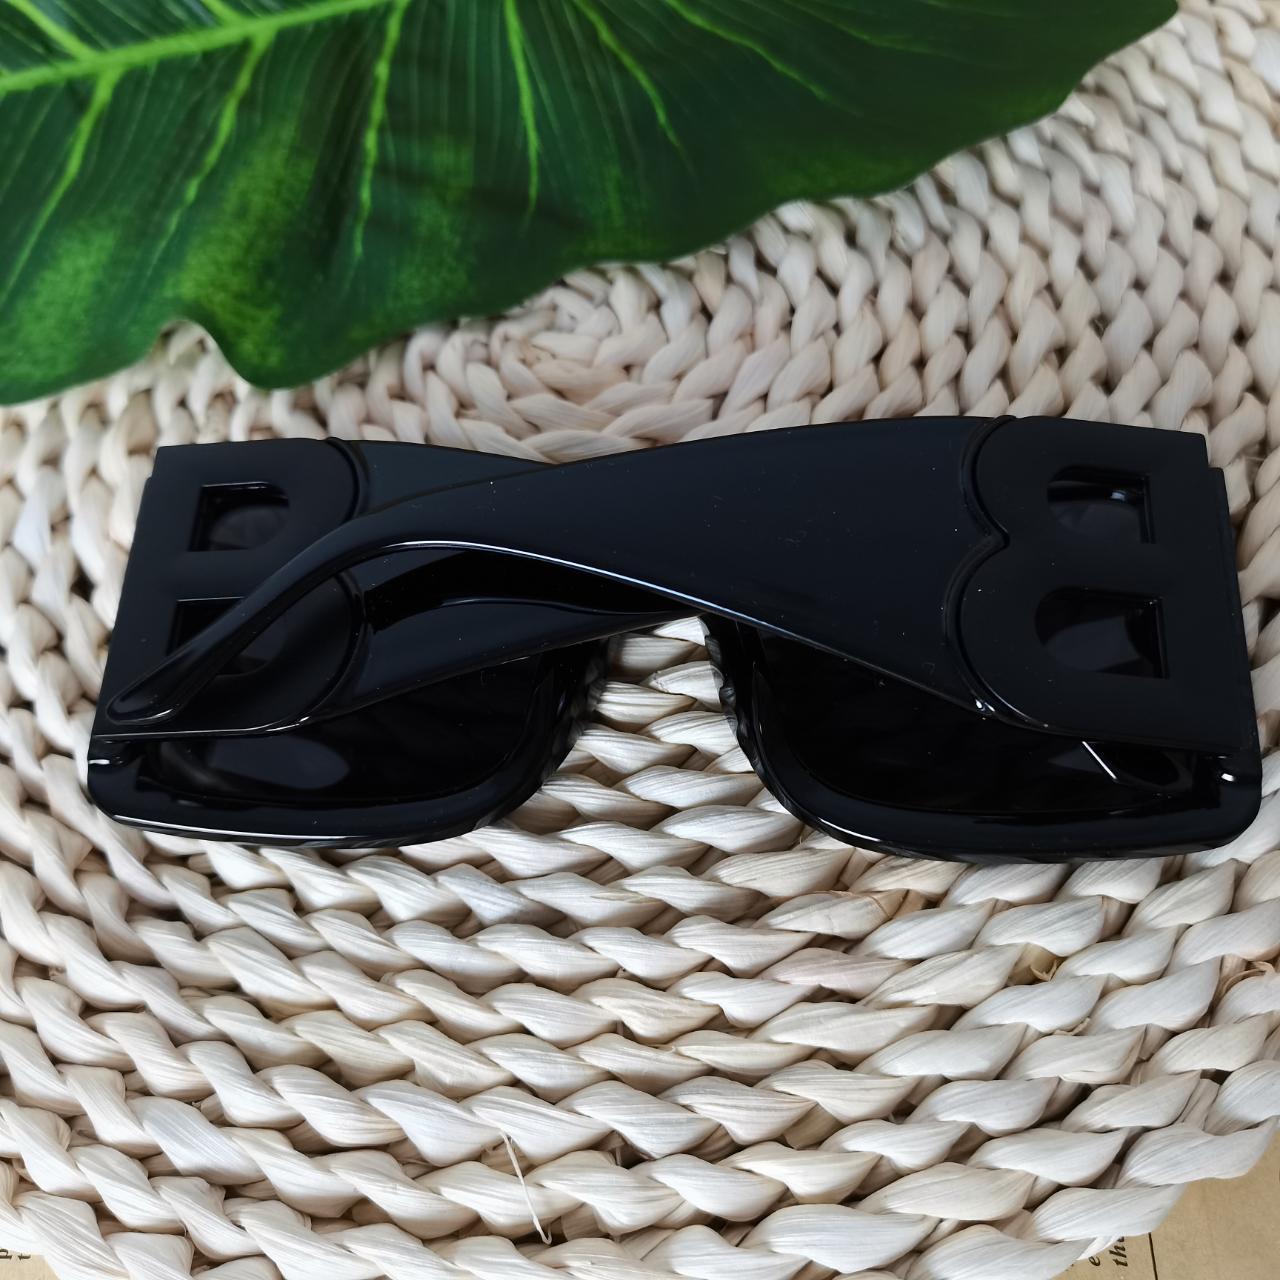 Product Image 2 - Sunglasses Outdoor Driving Street Shooting